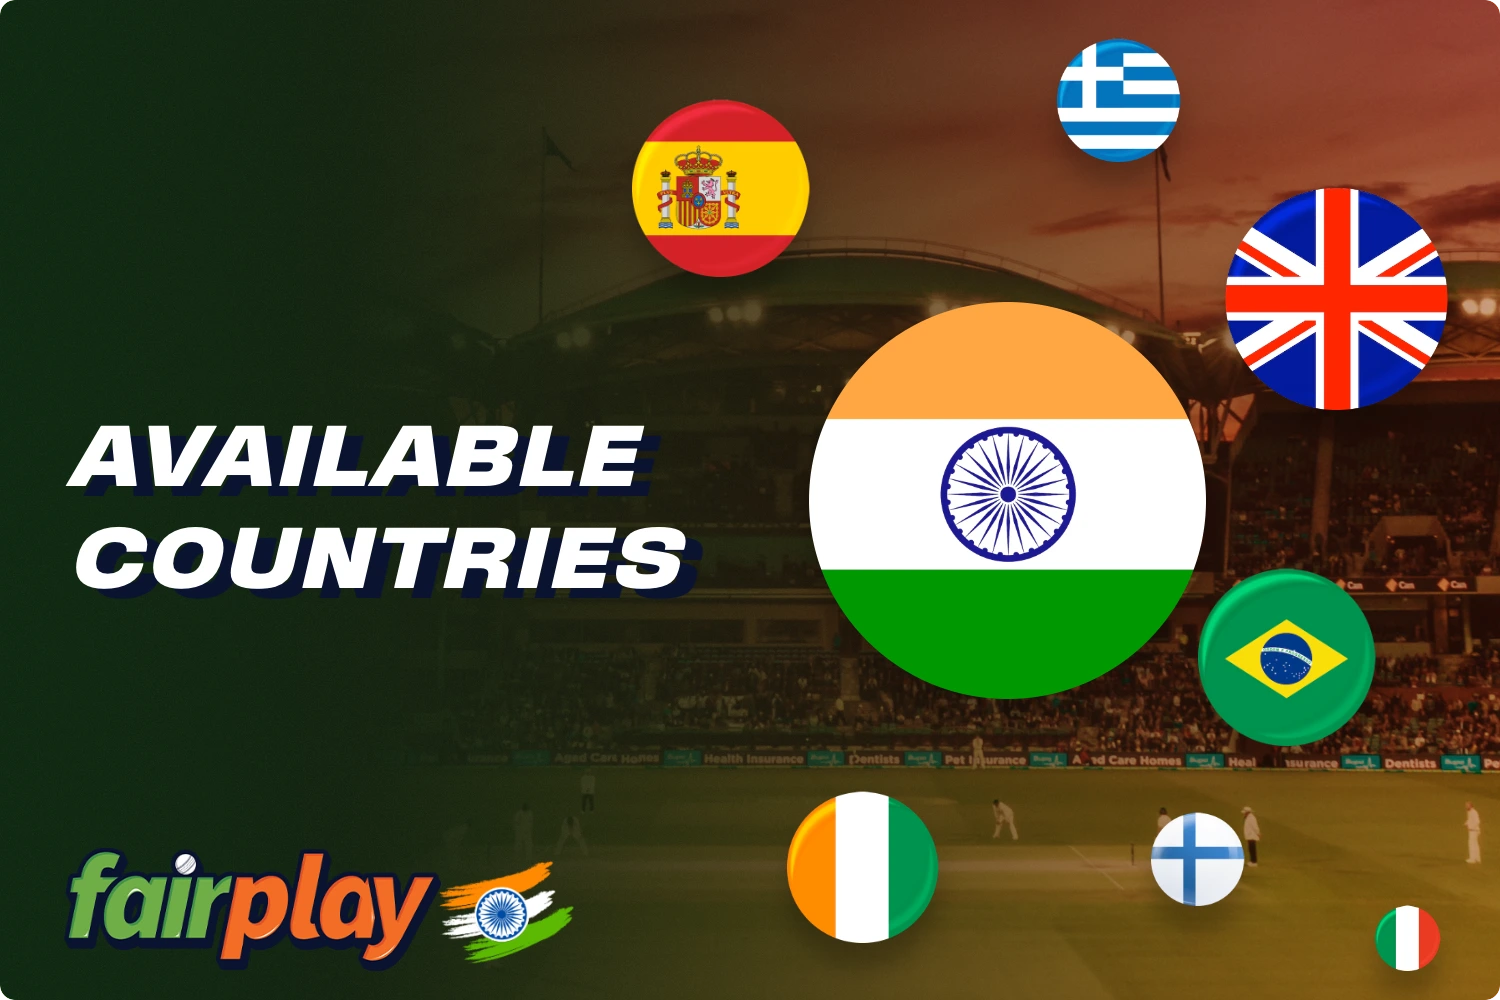 The Fairplay platform is available in many countries